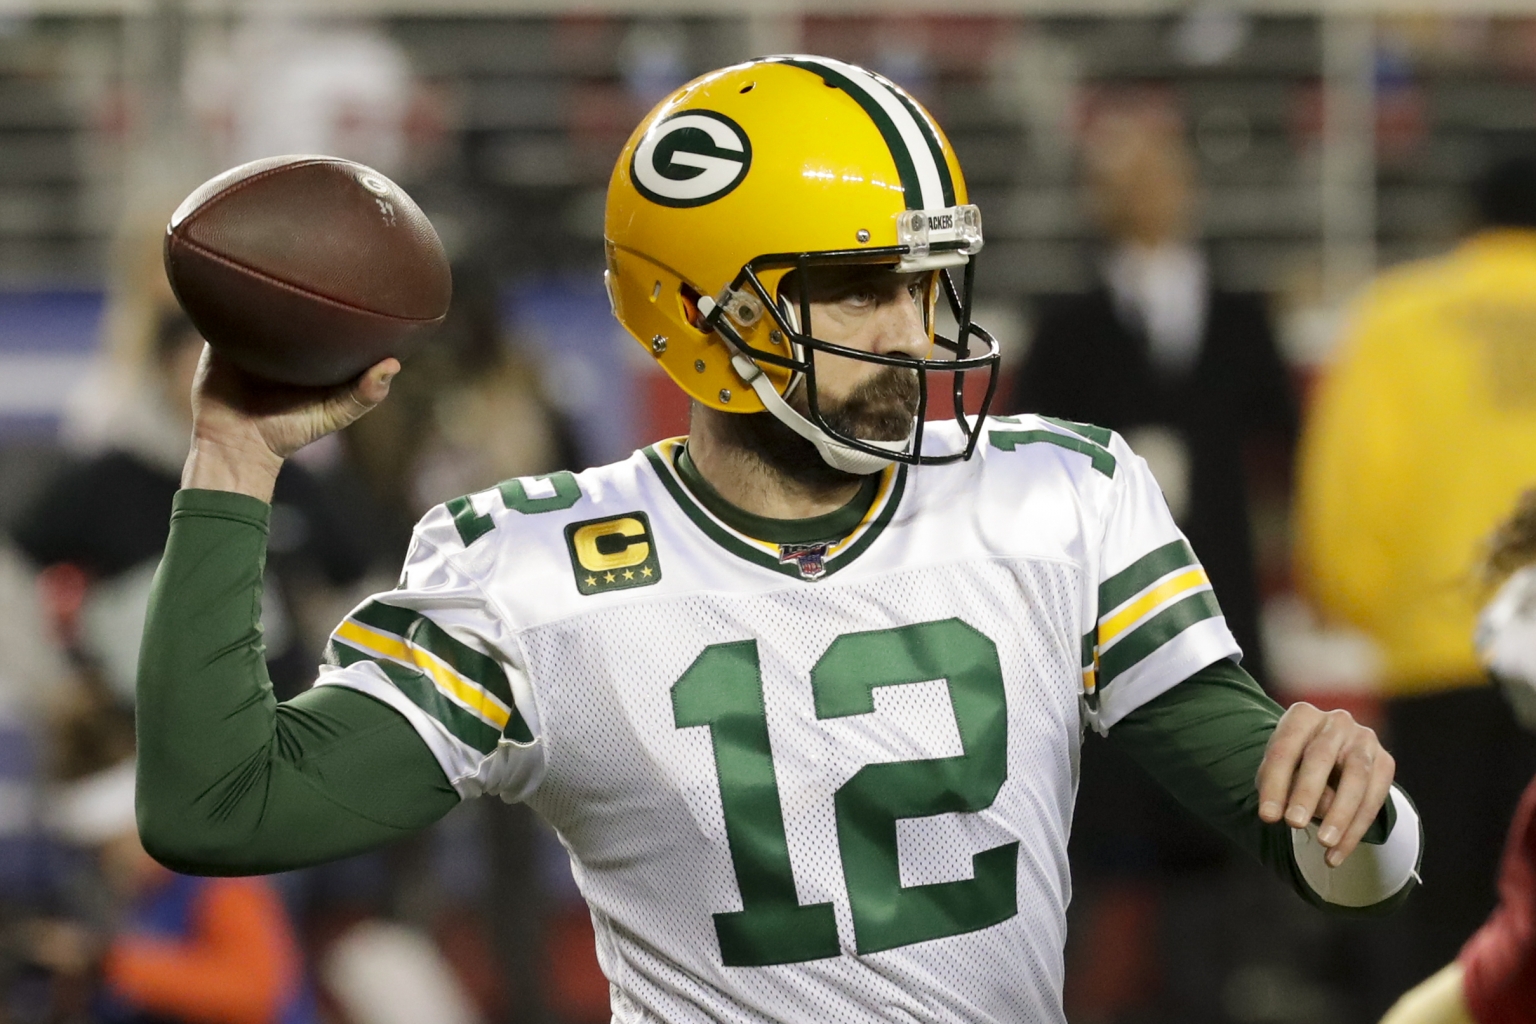 NFL Betting on Green Bay Packers Super Bowl Odds After The Draft